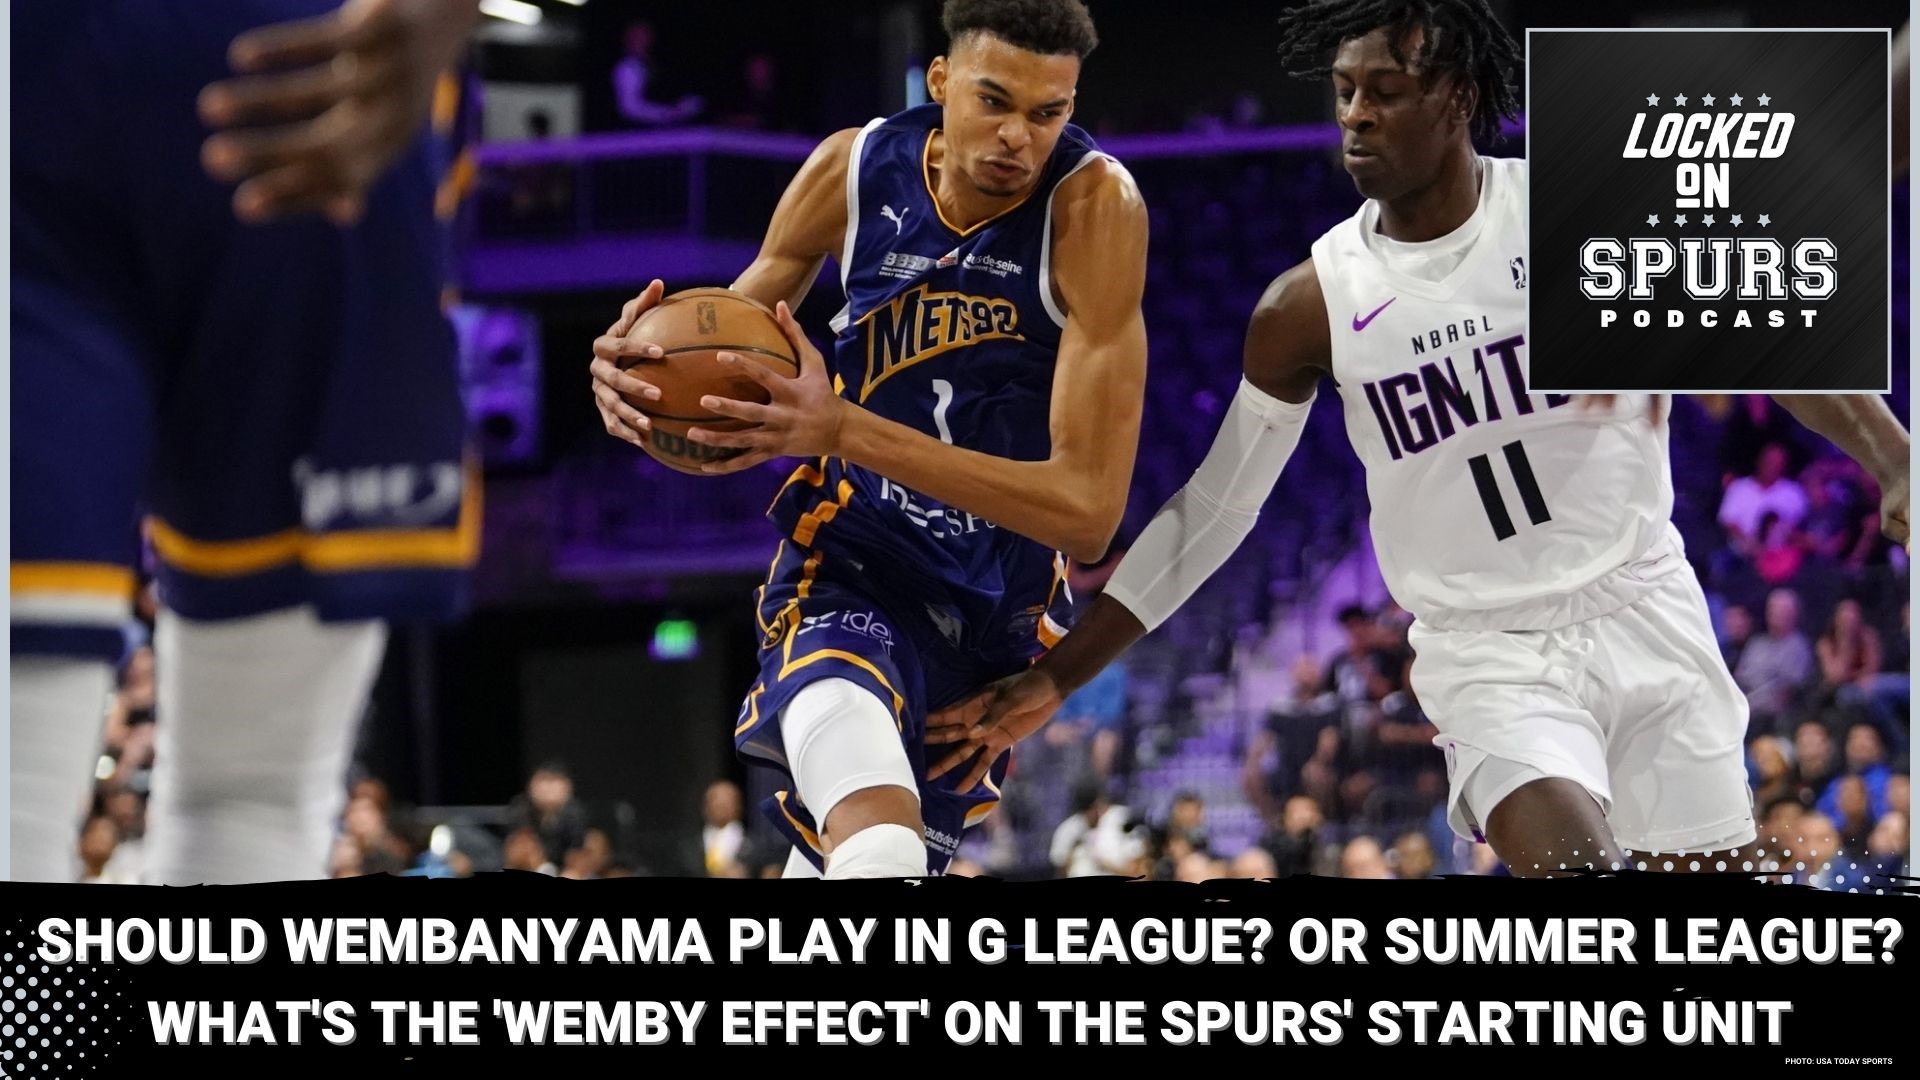 Should Wembanyama use the G League stage to better himself for the NBA?